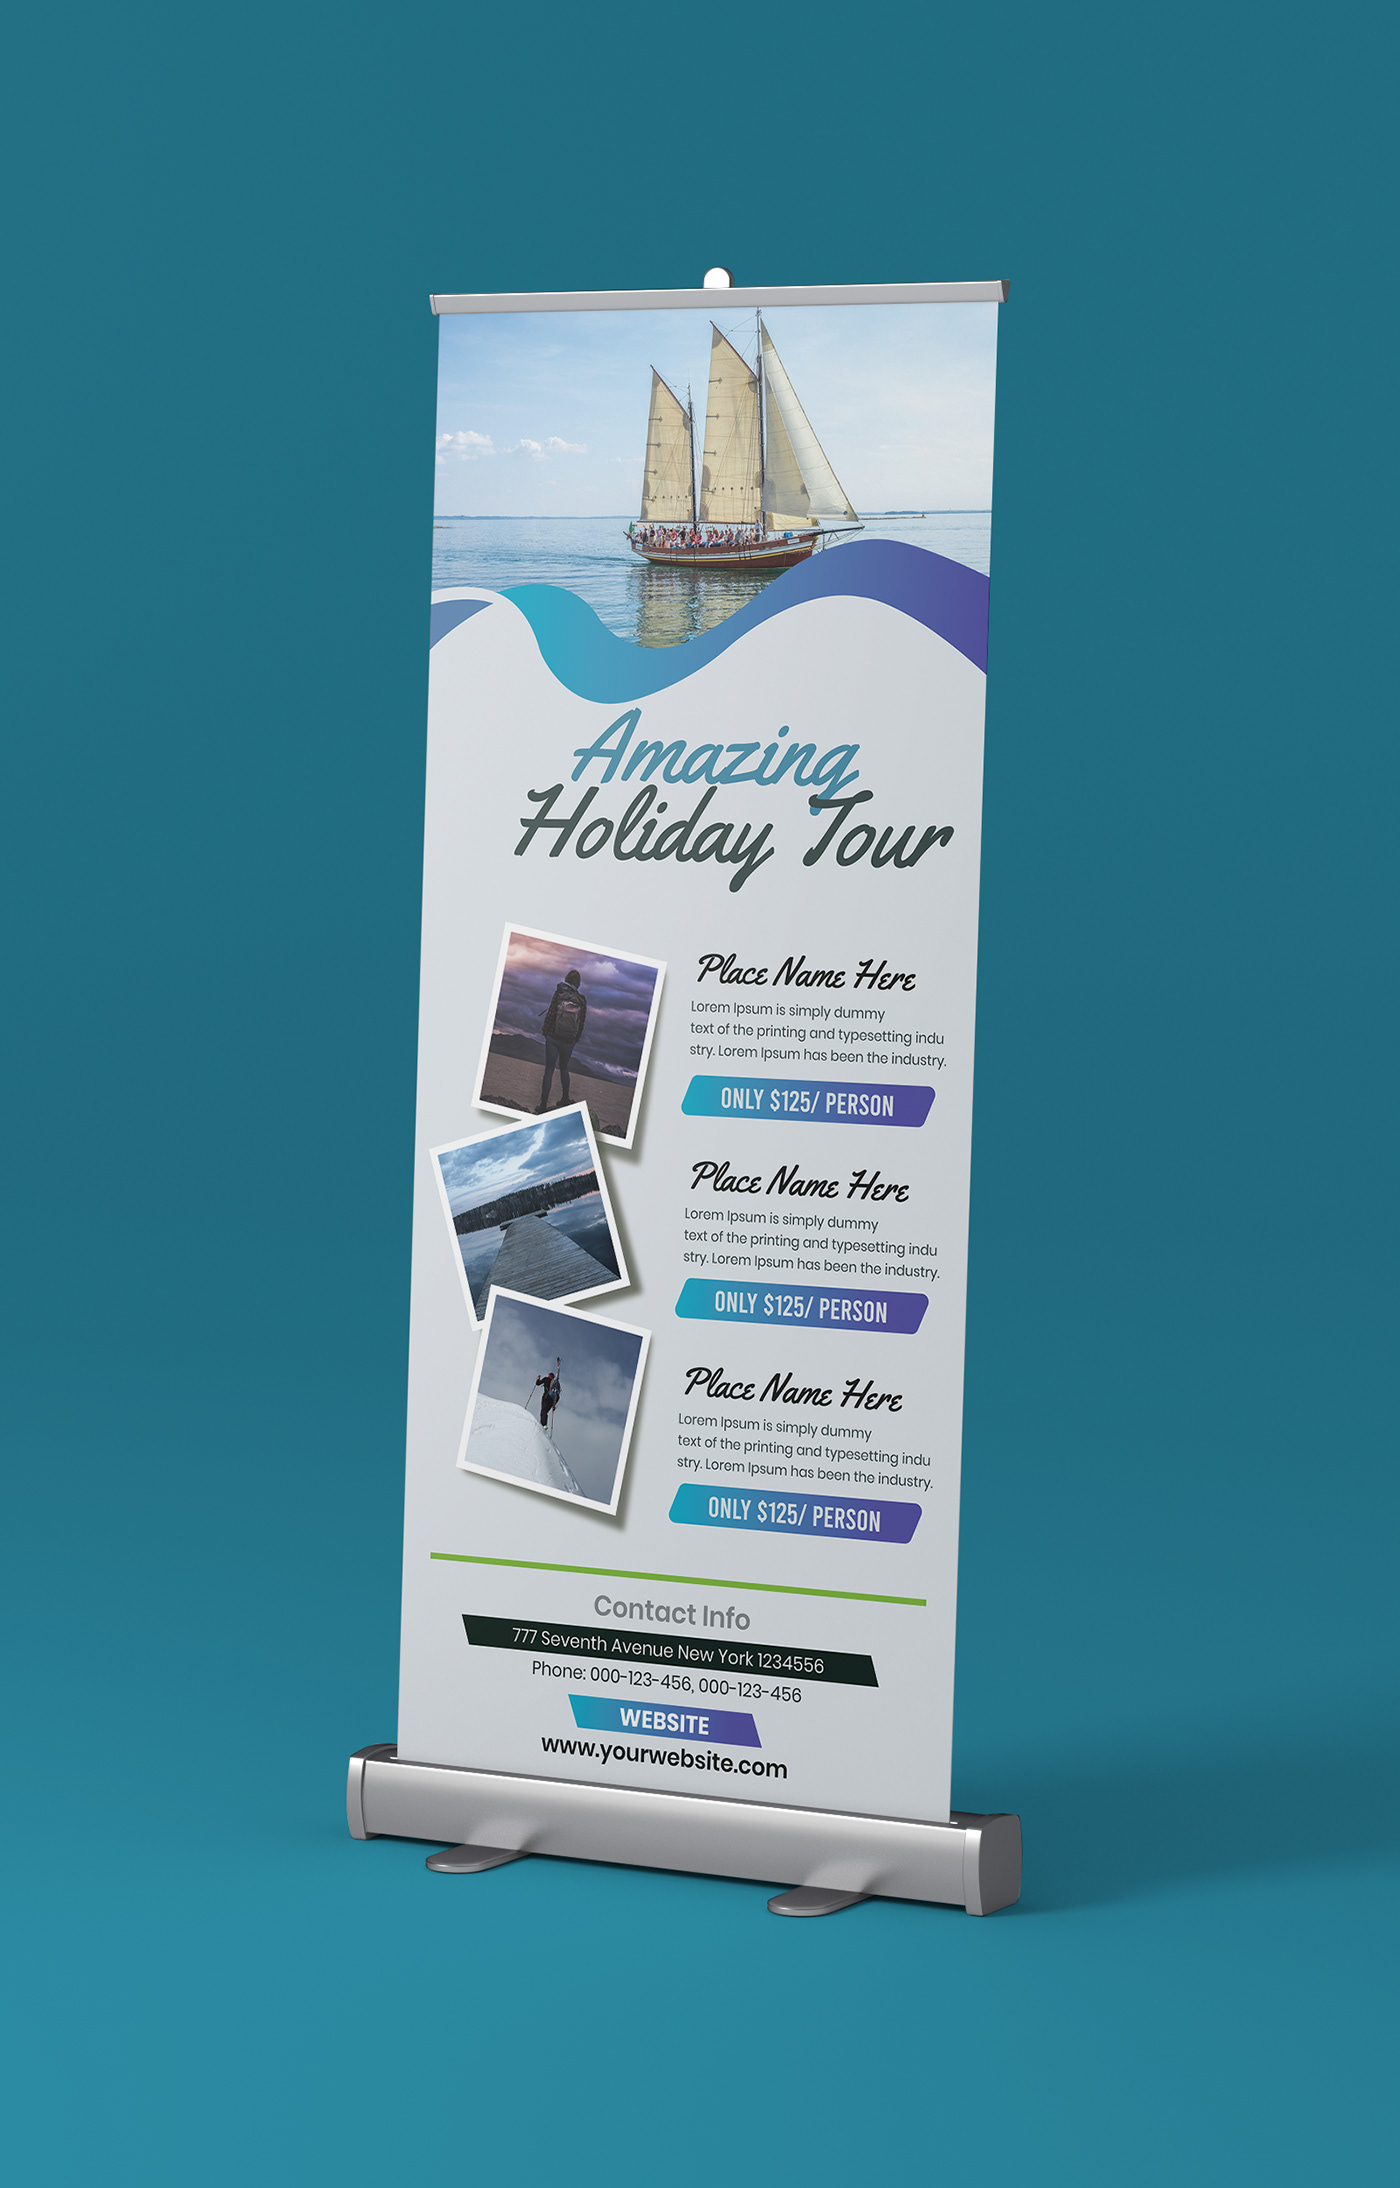 Ad Banner banner Corporate Rollup Banner pop up Pull Up rollup banner standing tour rollup banner travel rollup banner X-Banner